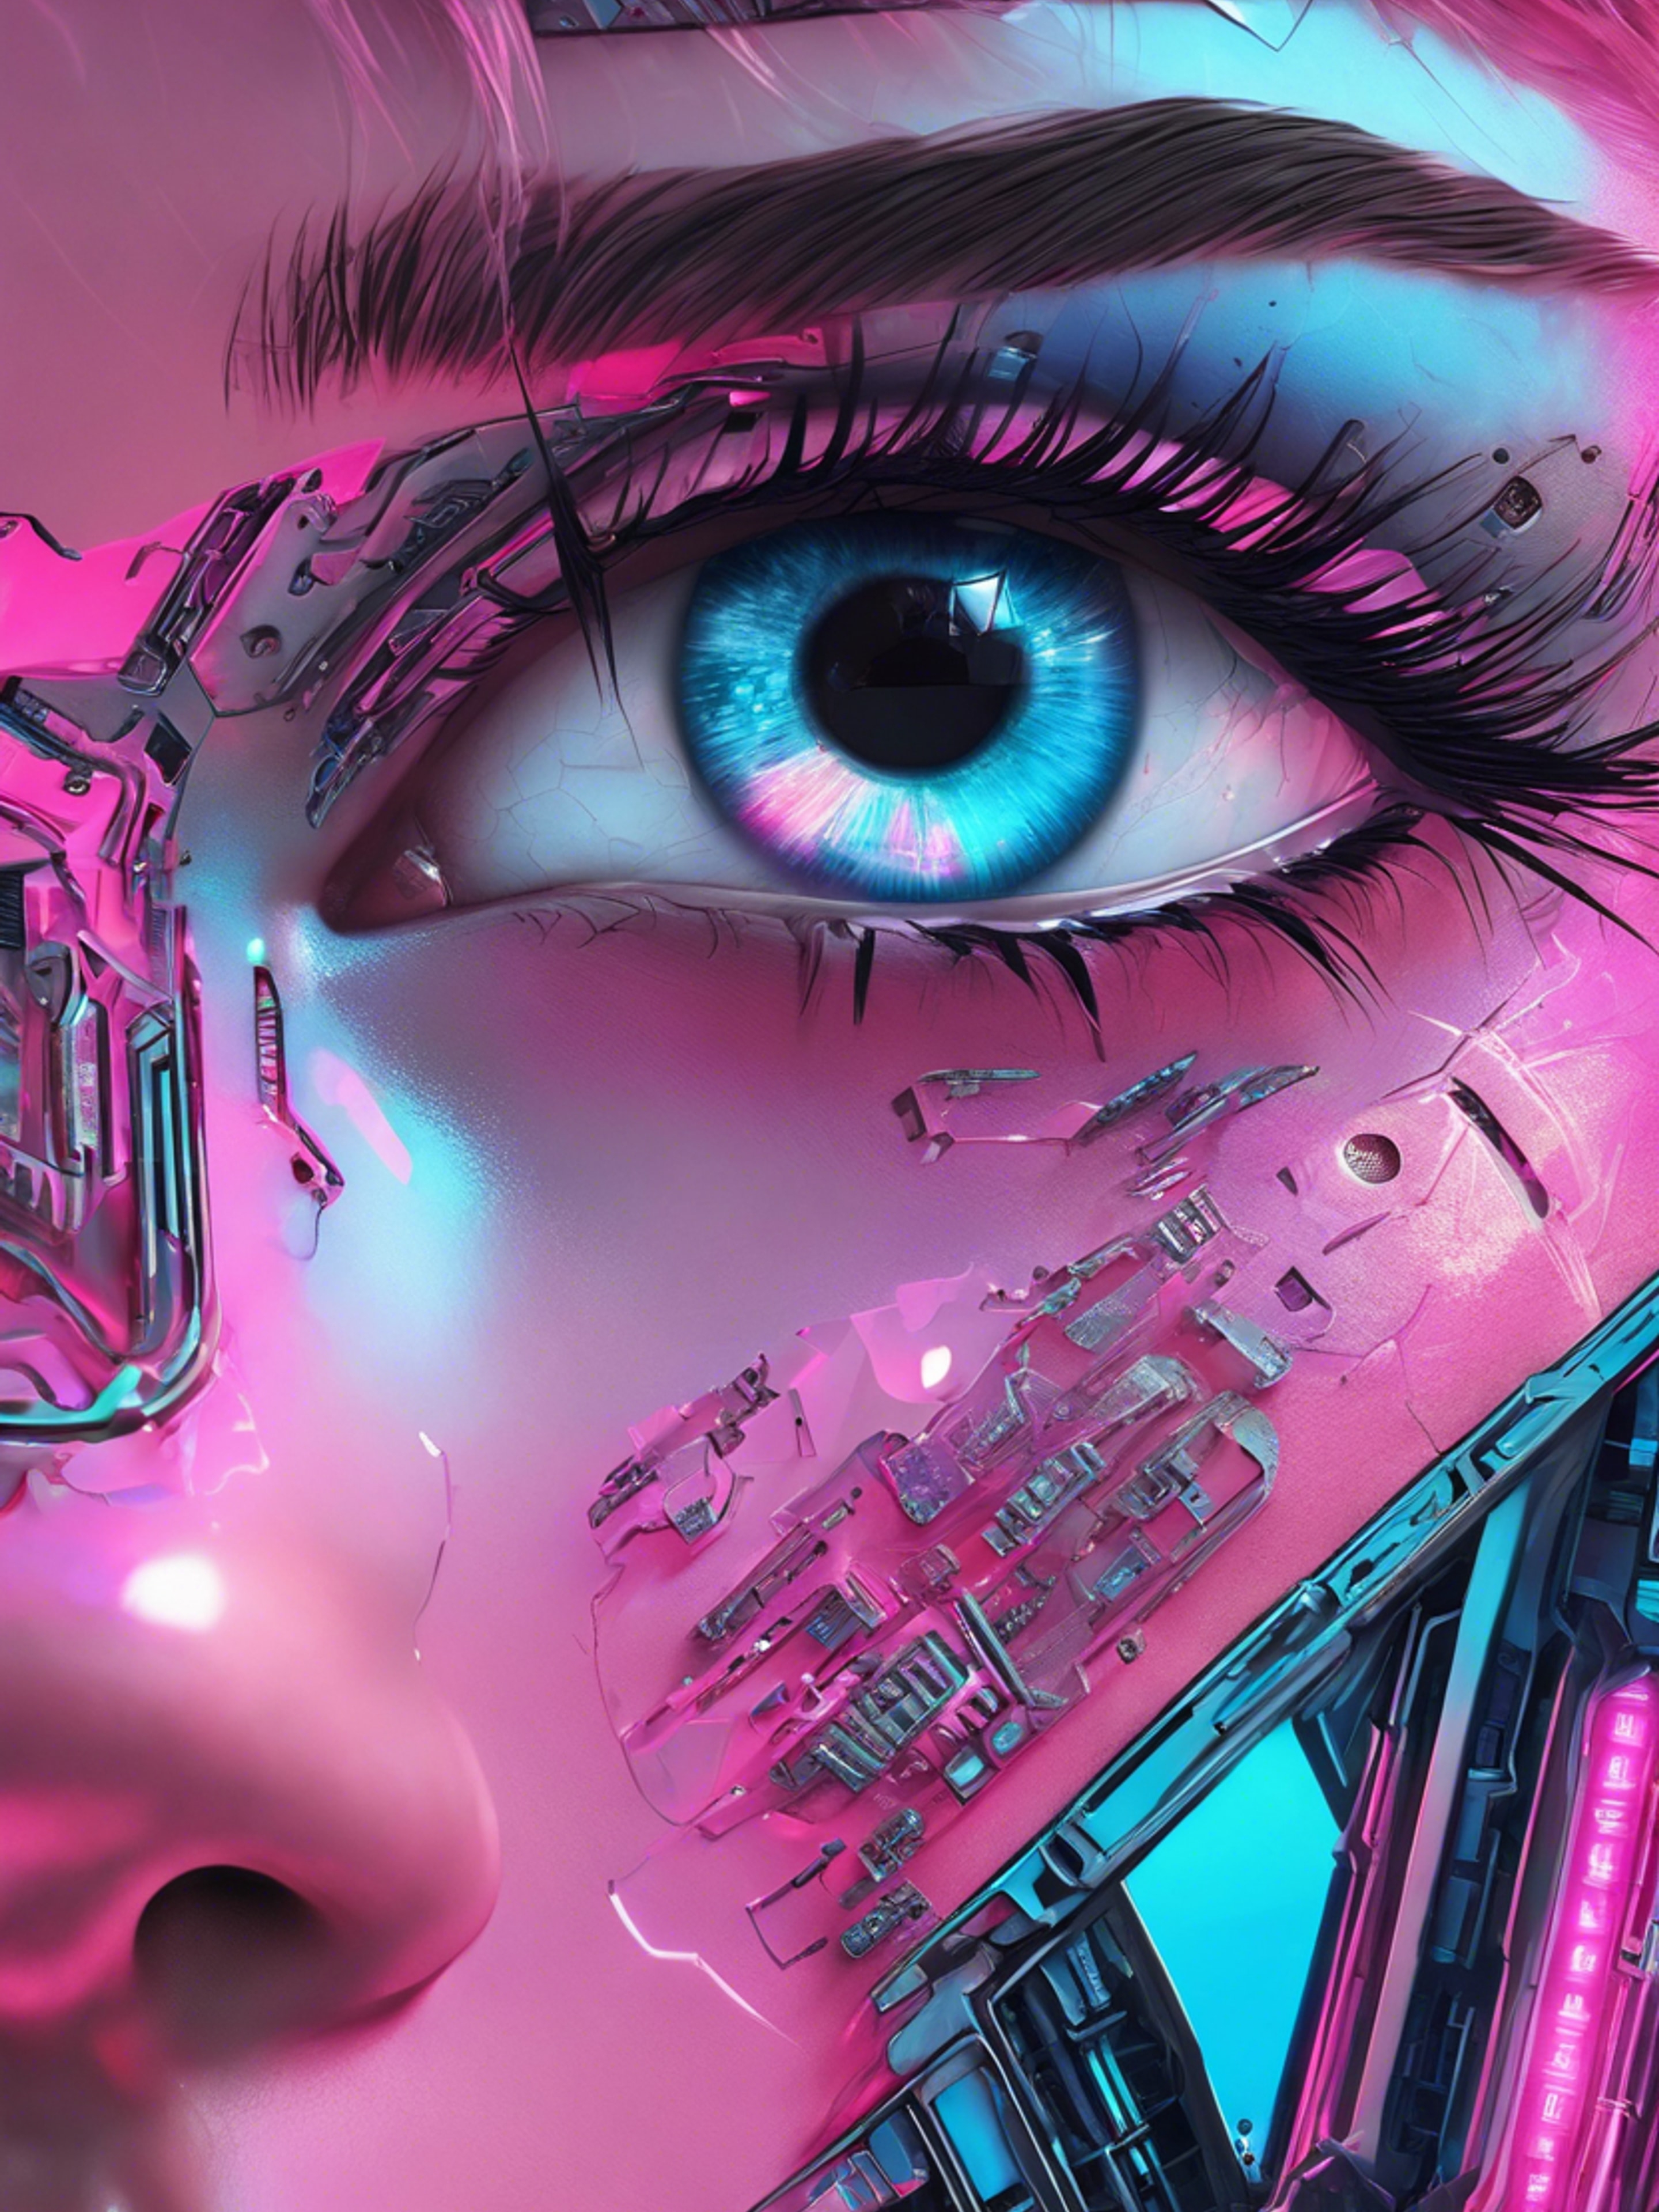 A close-up of a cyberpunk girl's eye, reflecting pink and blue city lights. Tapet[805009a14d1a4c10afac]